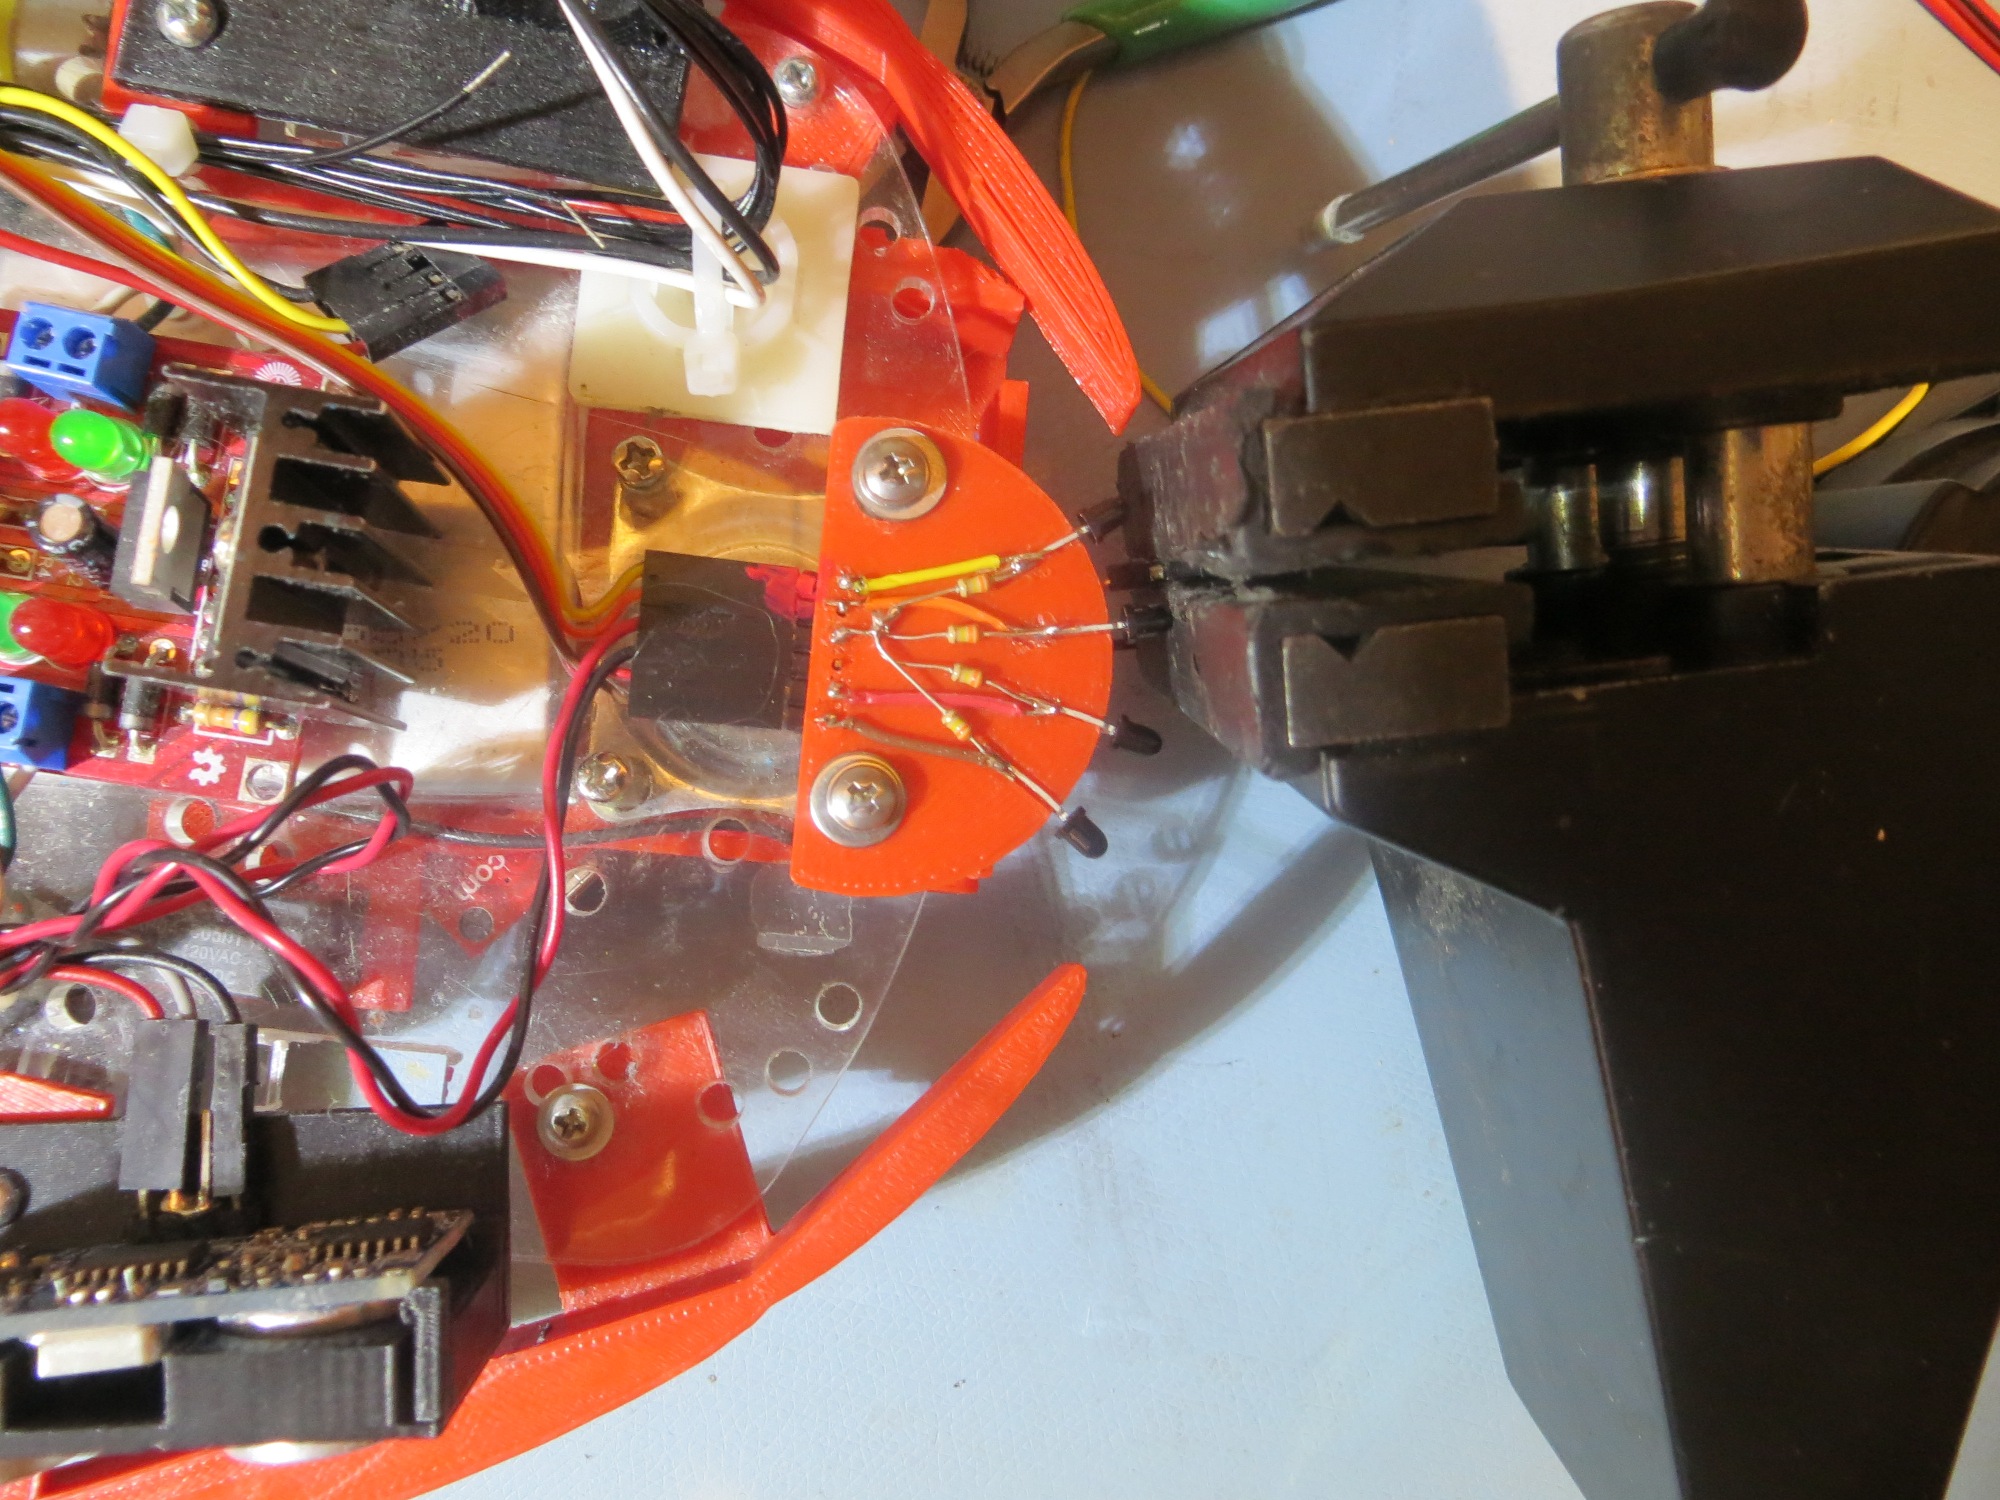 Final position after IR homing run. Note that the IR detector module actually struck (and bent) the IR emitter diode.